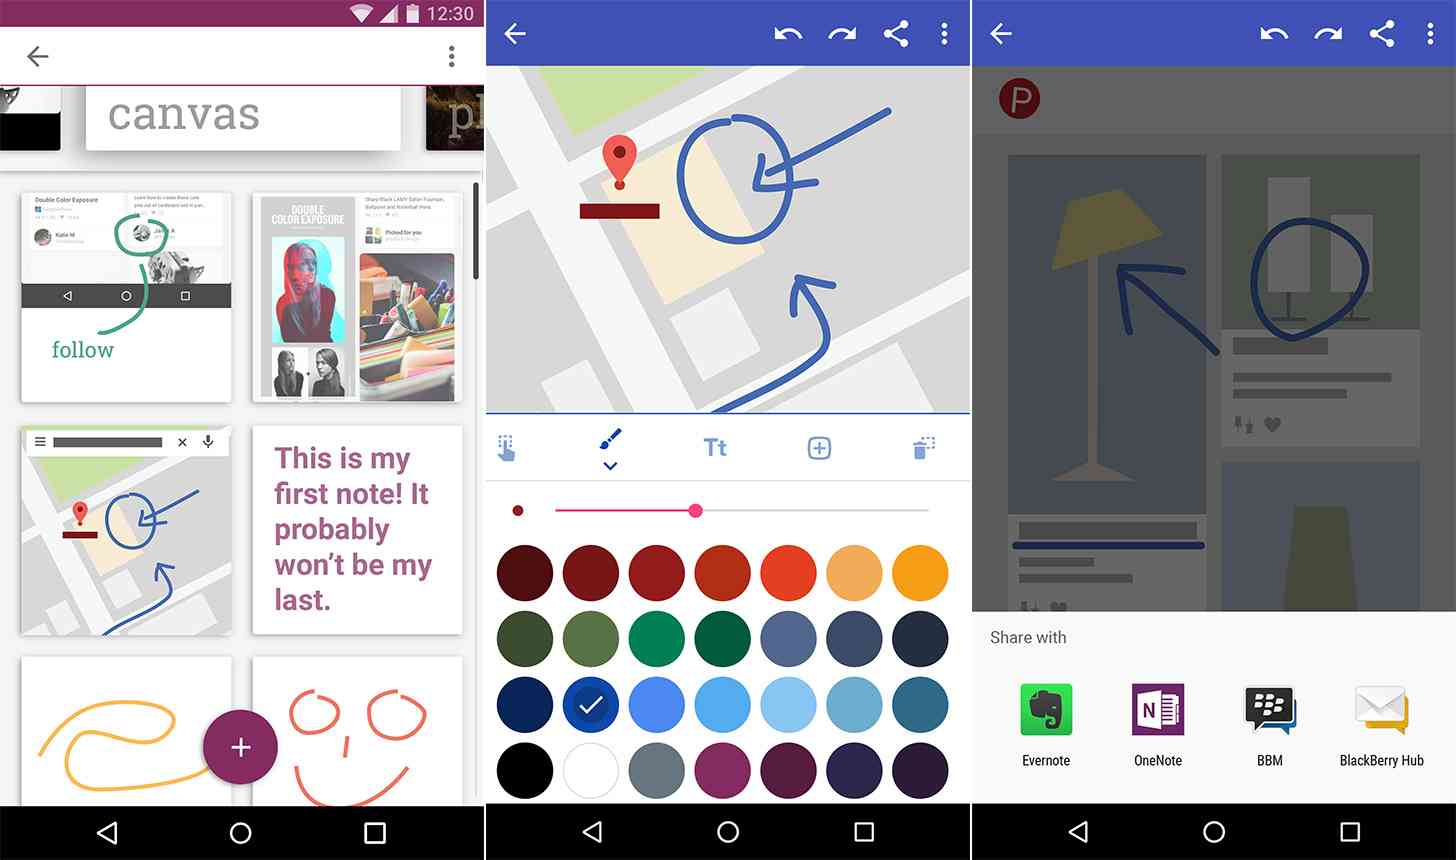 BlackBerry Notable Android app screenshots